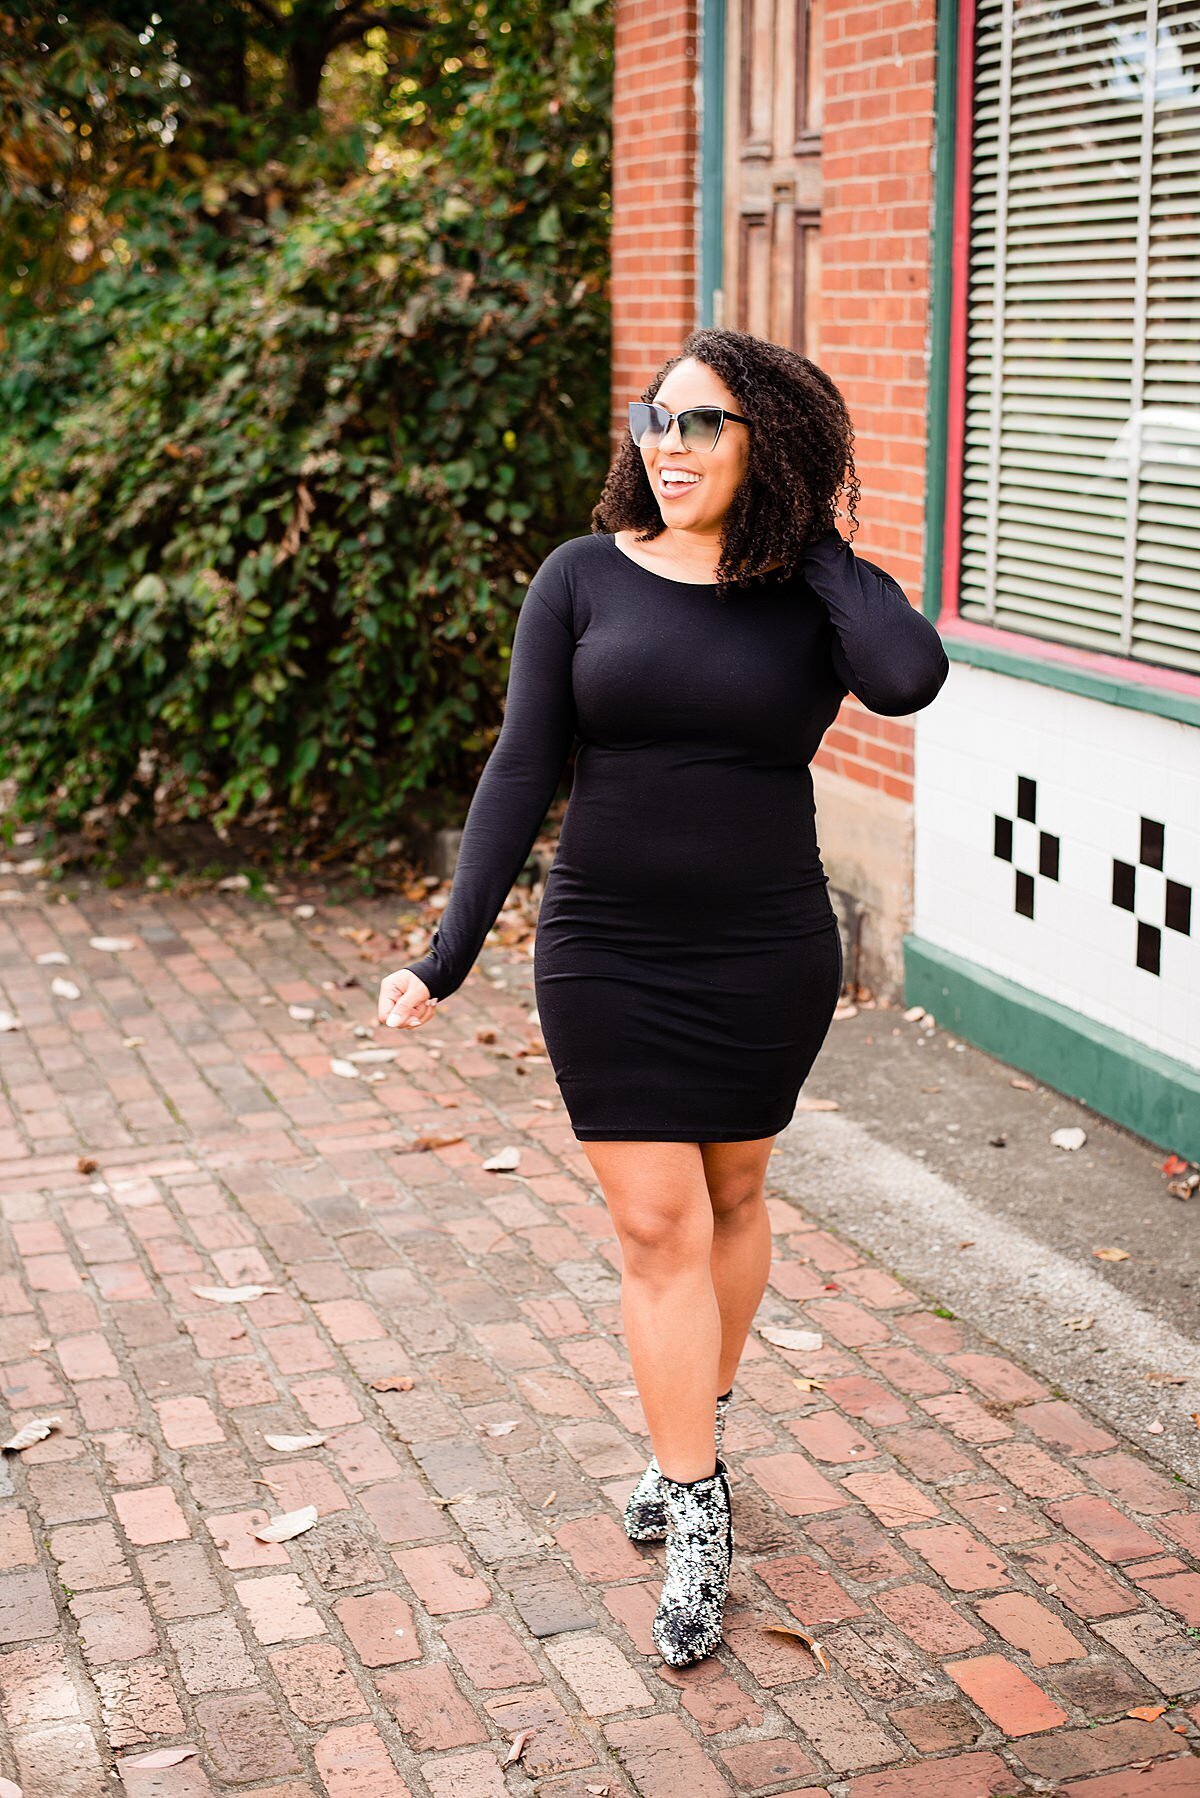 Jasmine Sweet strolling down sidewalk in Germantown wearing a fitted black dress, sequin boots and sunglasses